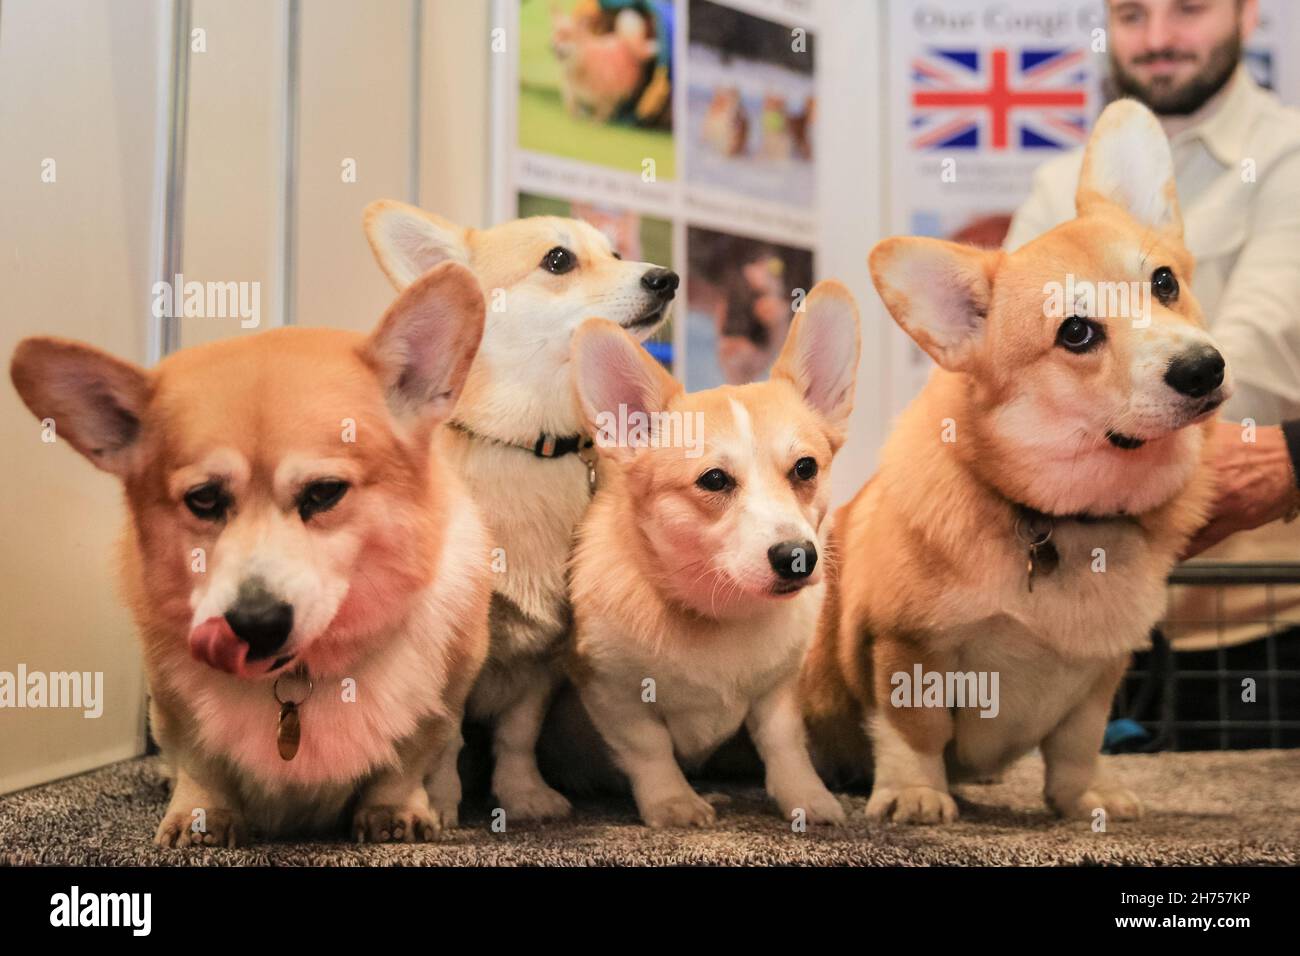 Excel Exhibition Centre, London, UK, 20th Nov 2021.Welsh Corgis (Pembroke) Edward, Coby, Lola and Barney, famous for being the breed of Corgi the Queen keeps, happily pose at the Welsh Corgi League stand.  London's biggest dog event, Discover Dogs, returns to ExCeL London, giving visitors the opportunity to meet, greet and cuddle hundreds of dogs, and to celebrate the ways in which man's best friend helped thousands and have been our everyday heroes during the pandemic. The show is organised by The Kennel Club. Stock Photo